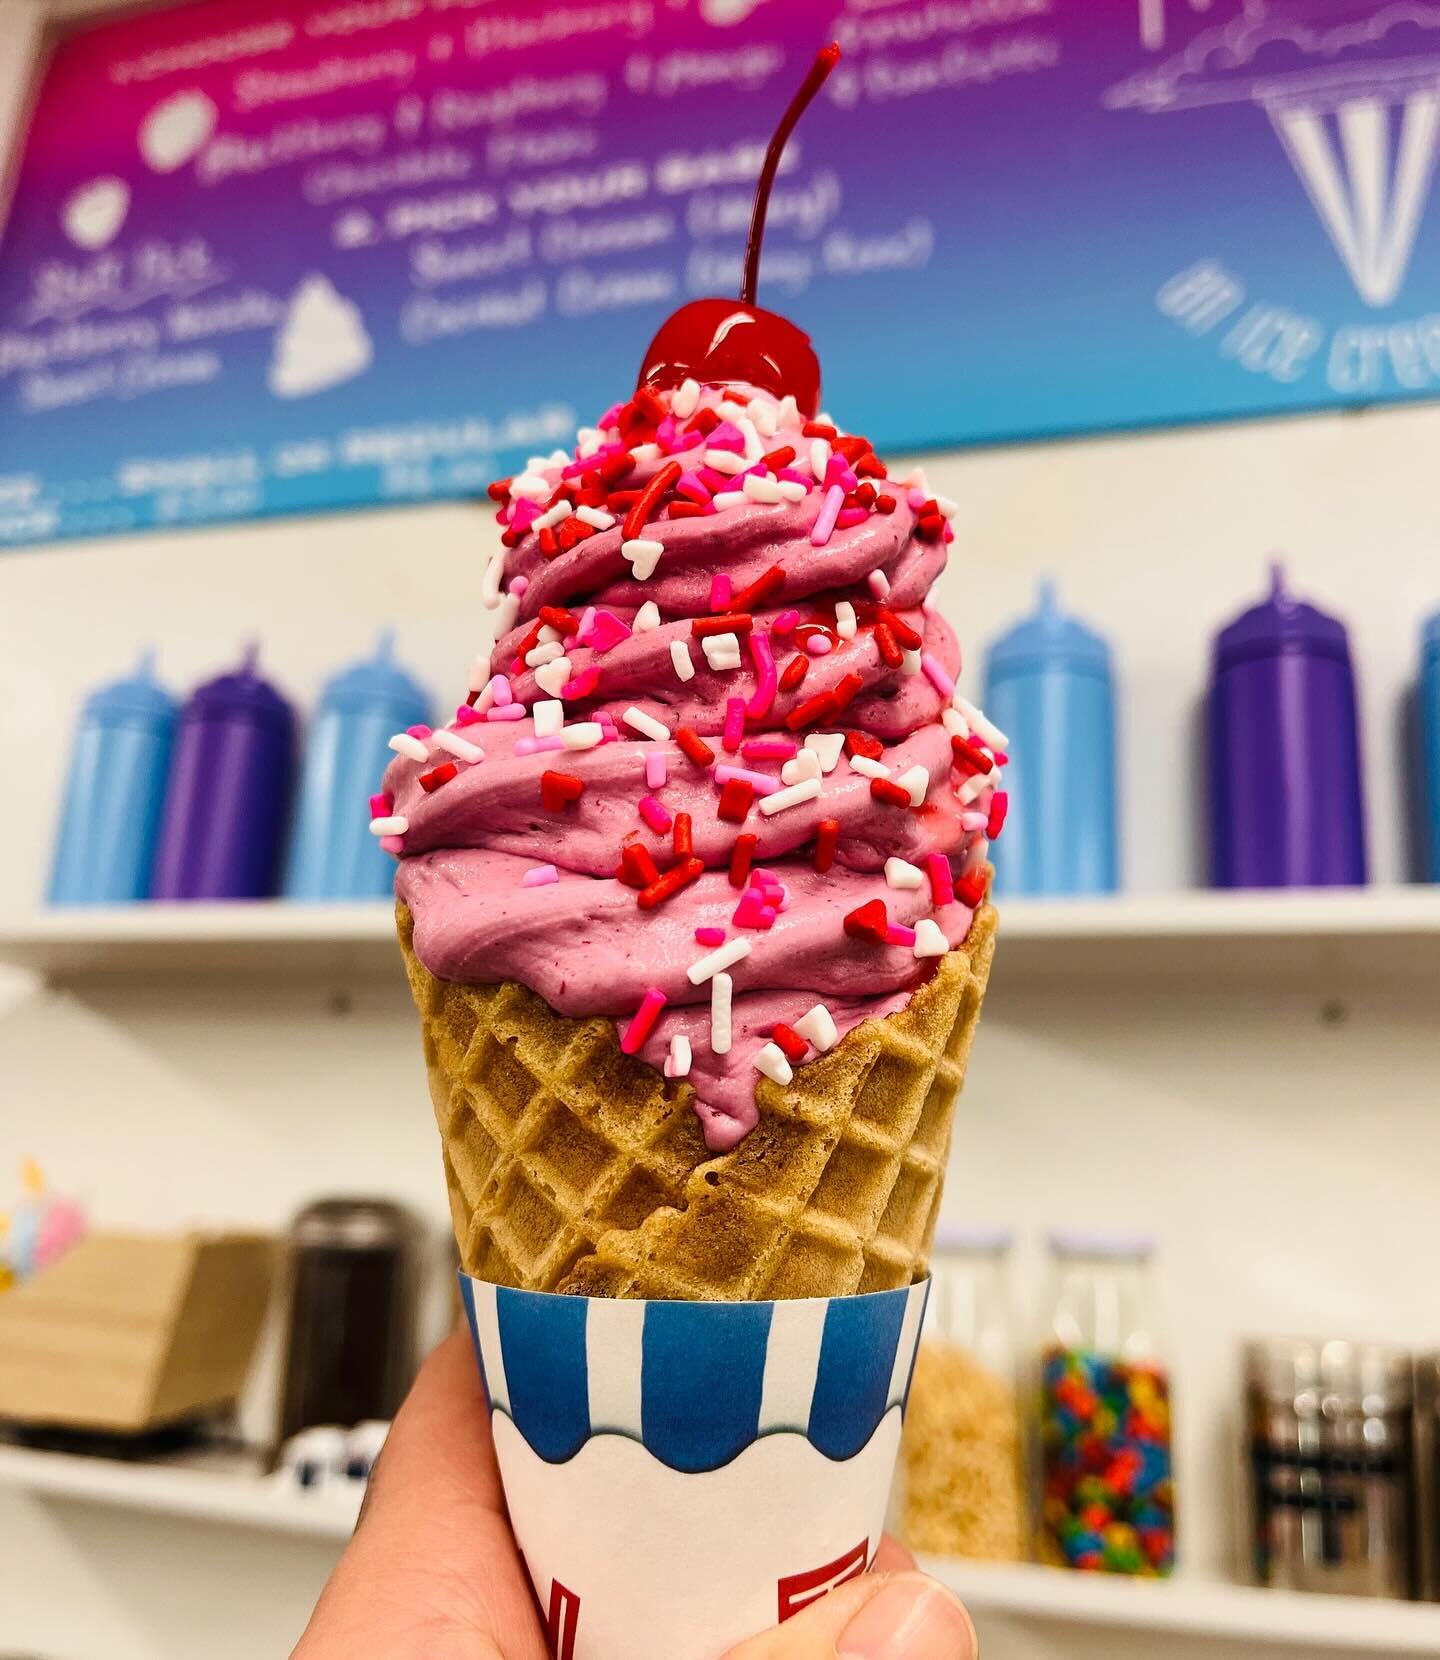 What makes your ice cream even more lovely? Add a cherry on top! Cherries and Valentine&rsquo;s sprinkles - available now!

#withacherryontop #NZxNW #newzealandstyleicecream #realfruiticecream #strawberryicecream